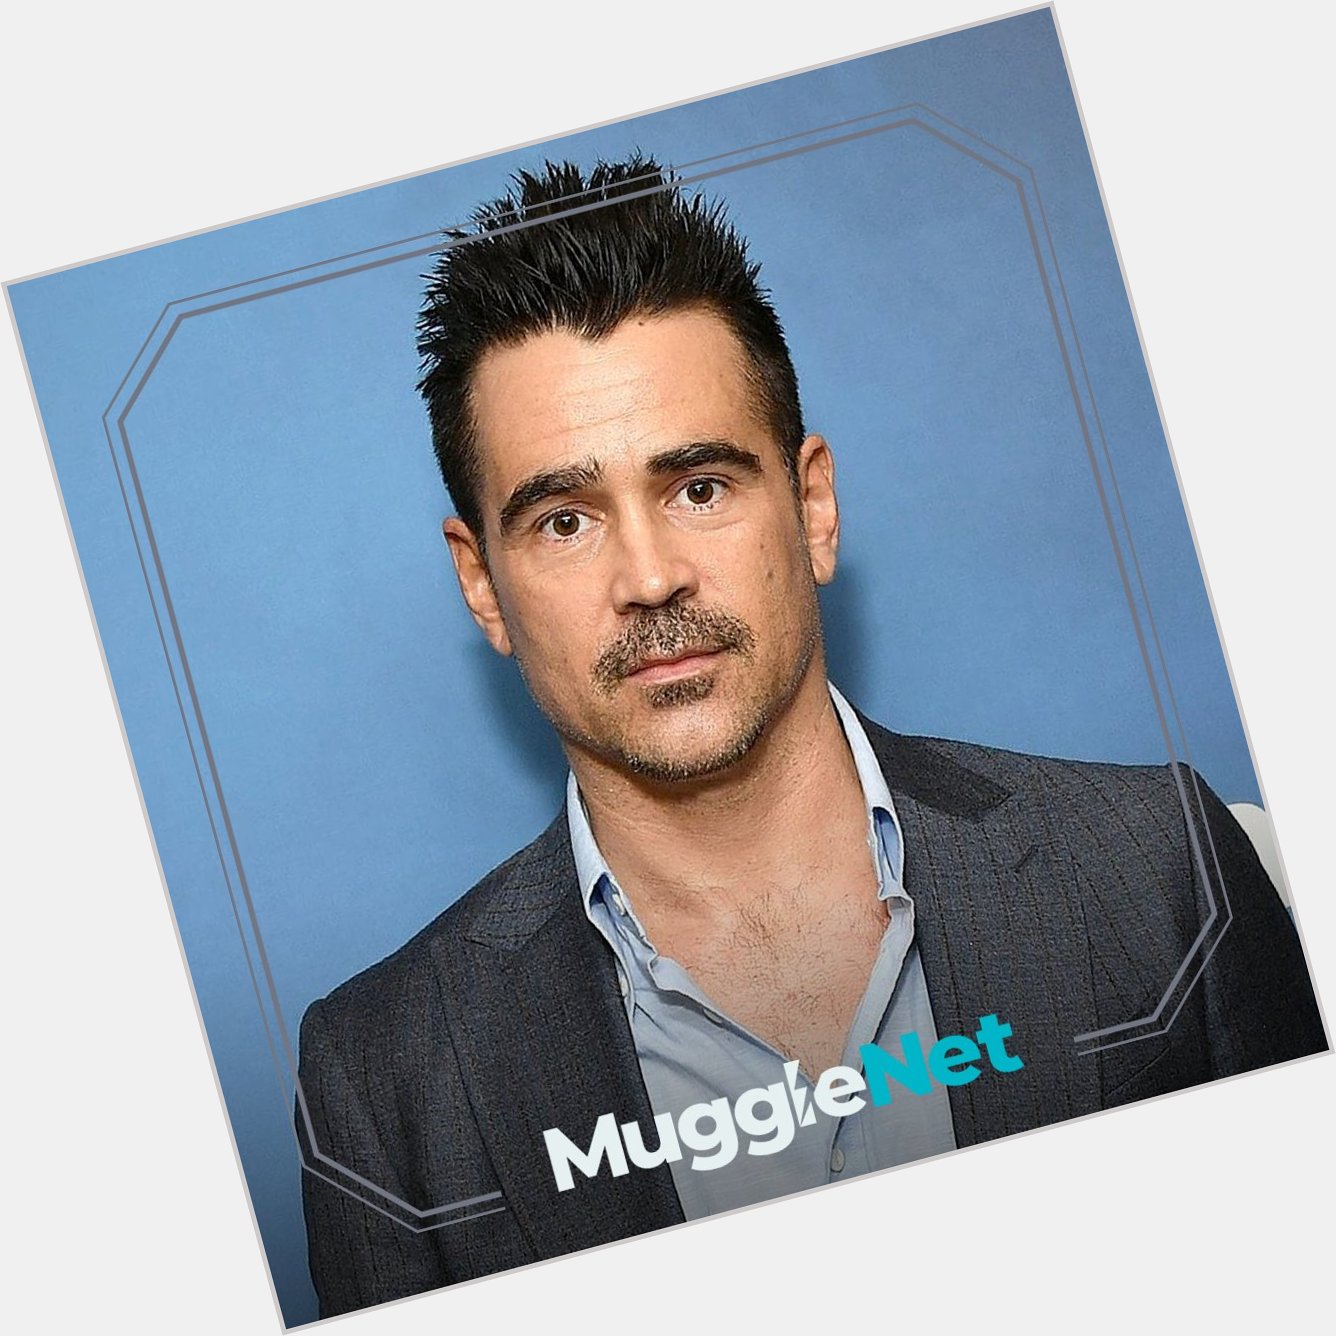 Wishing a happy birthday to Colin Farrell, who played Percival Graves in \"Fantastic Beasts and Where to Find Them\"! 